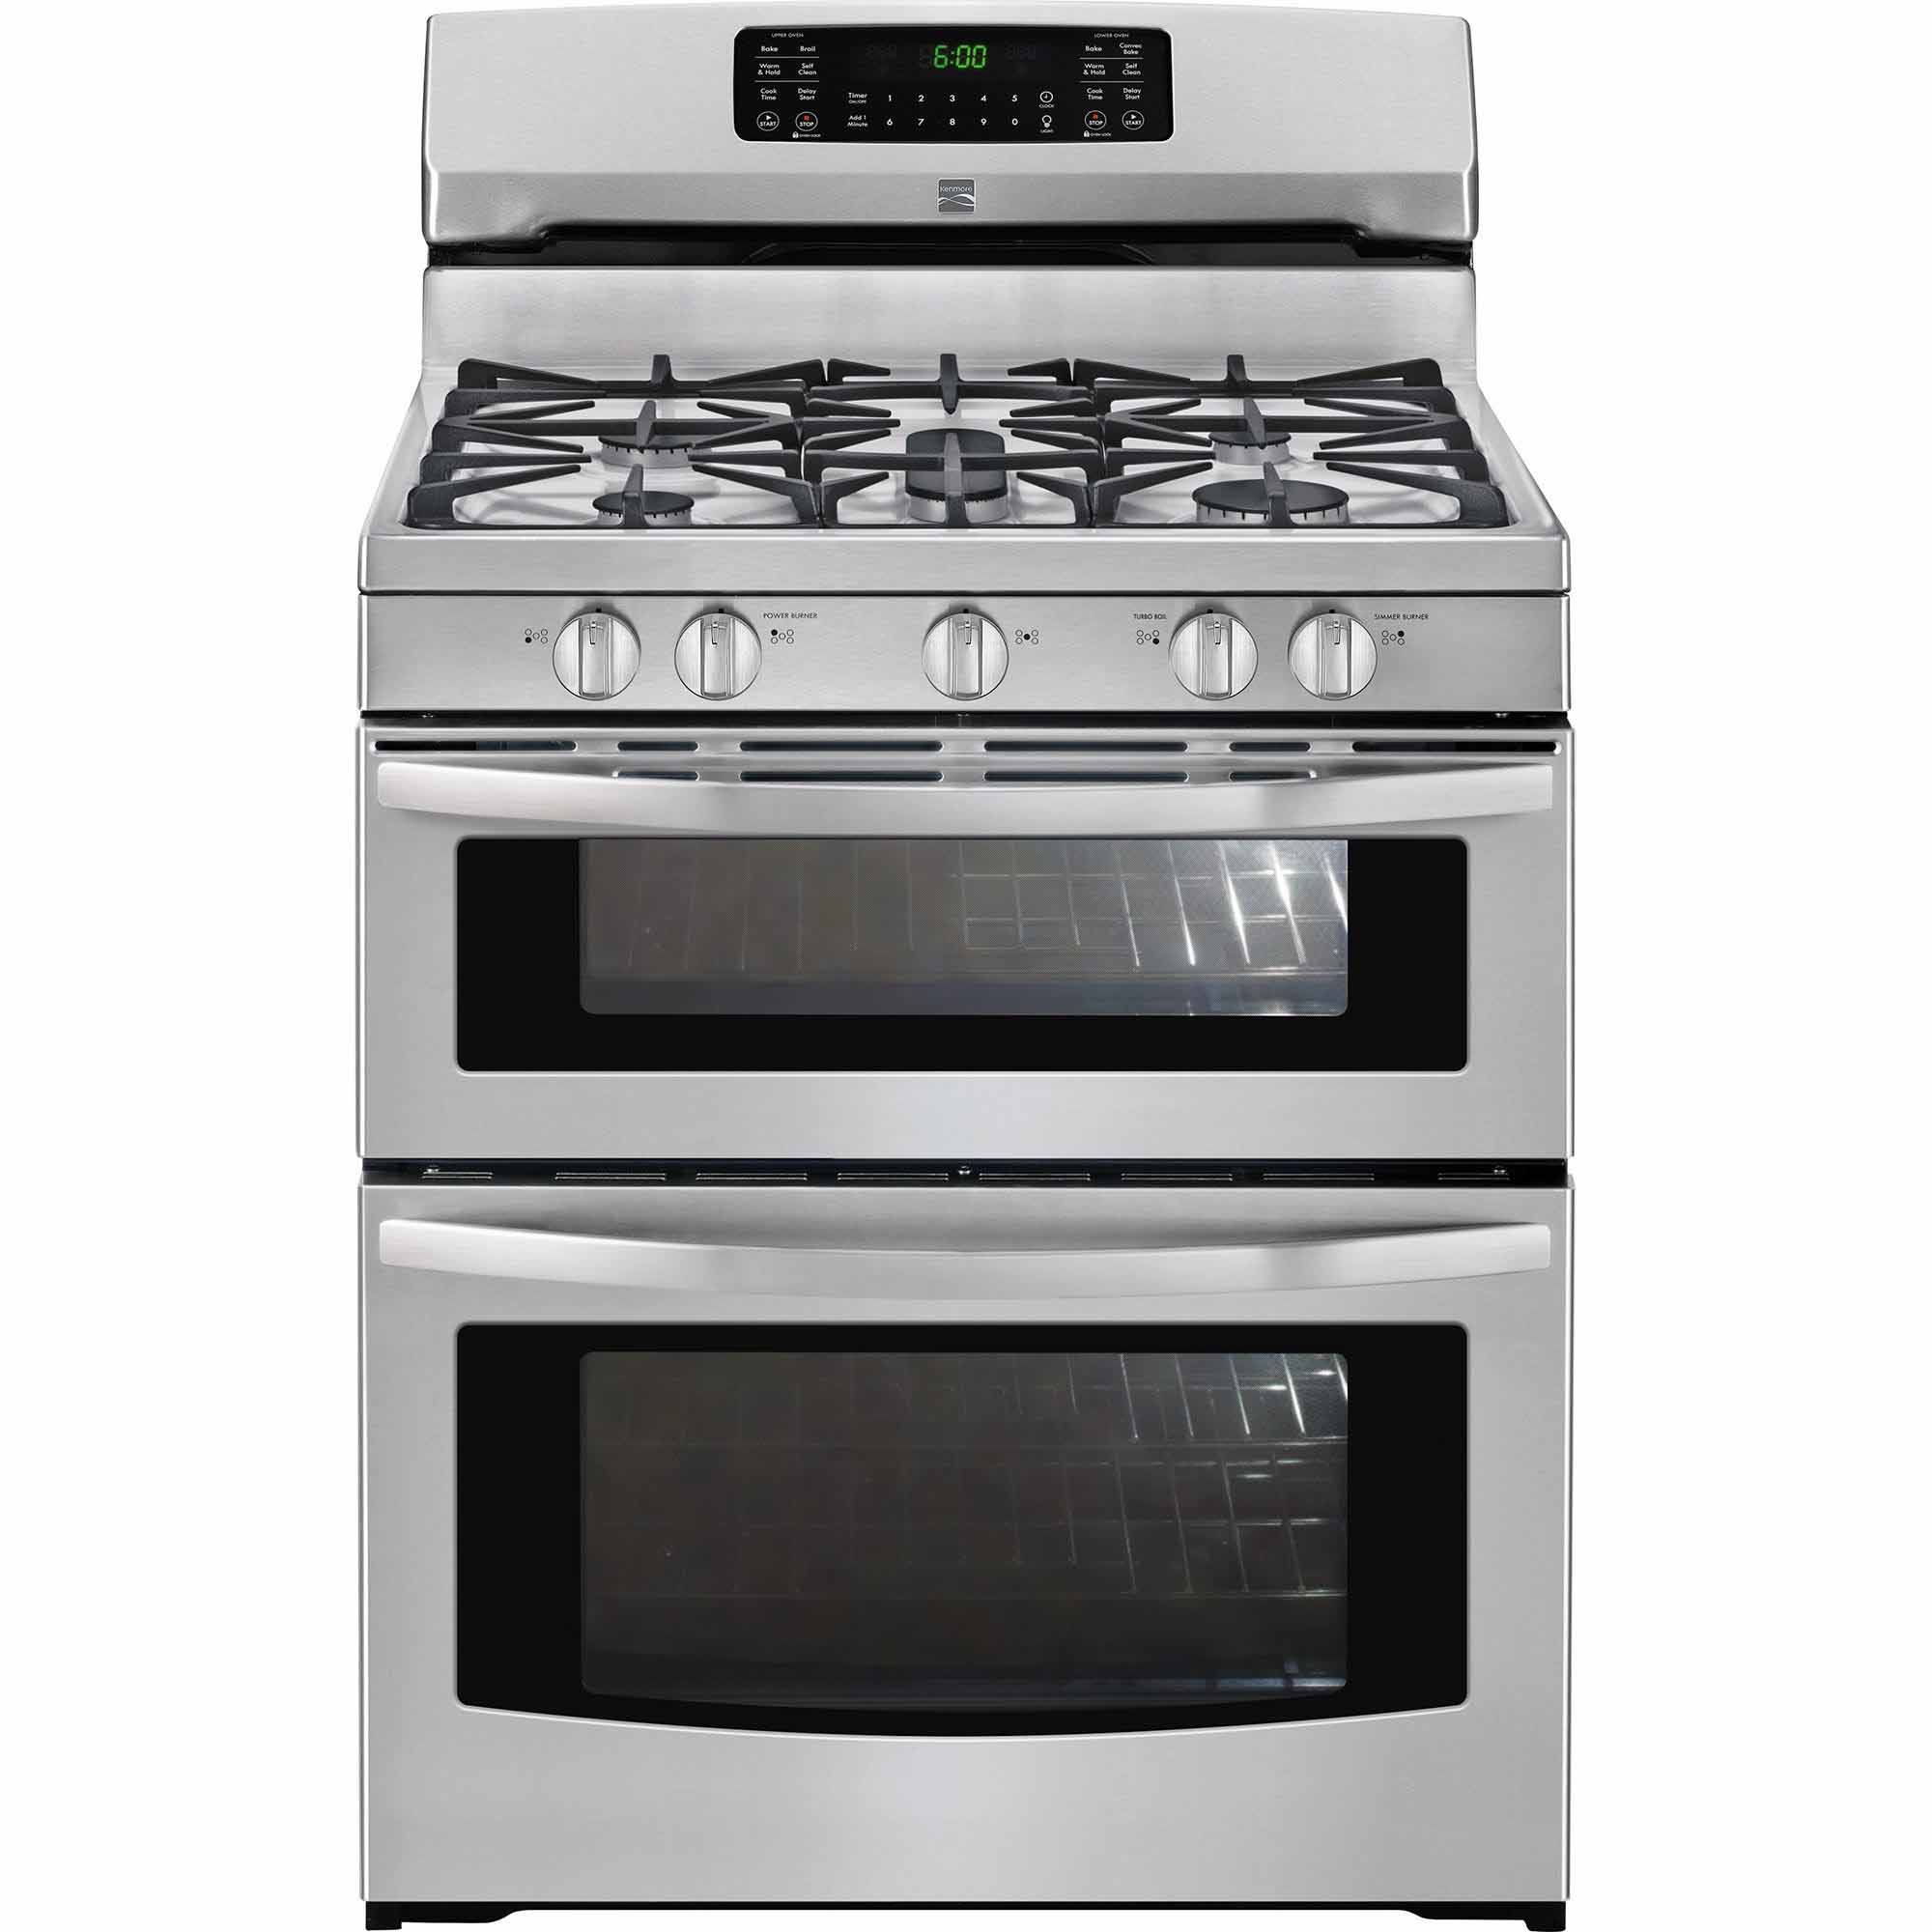 kenmore-78143-5-9-cu-ft-double-oven-gas-range-stainless-steel